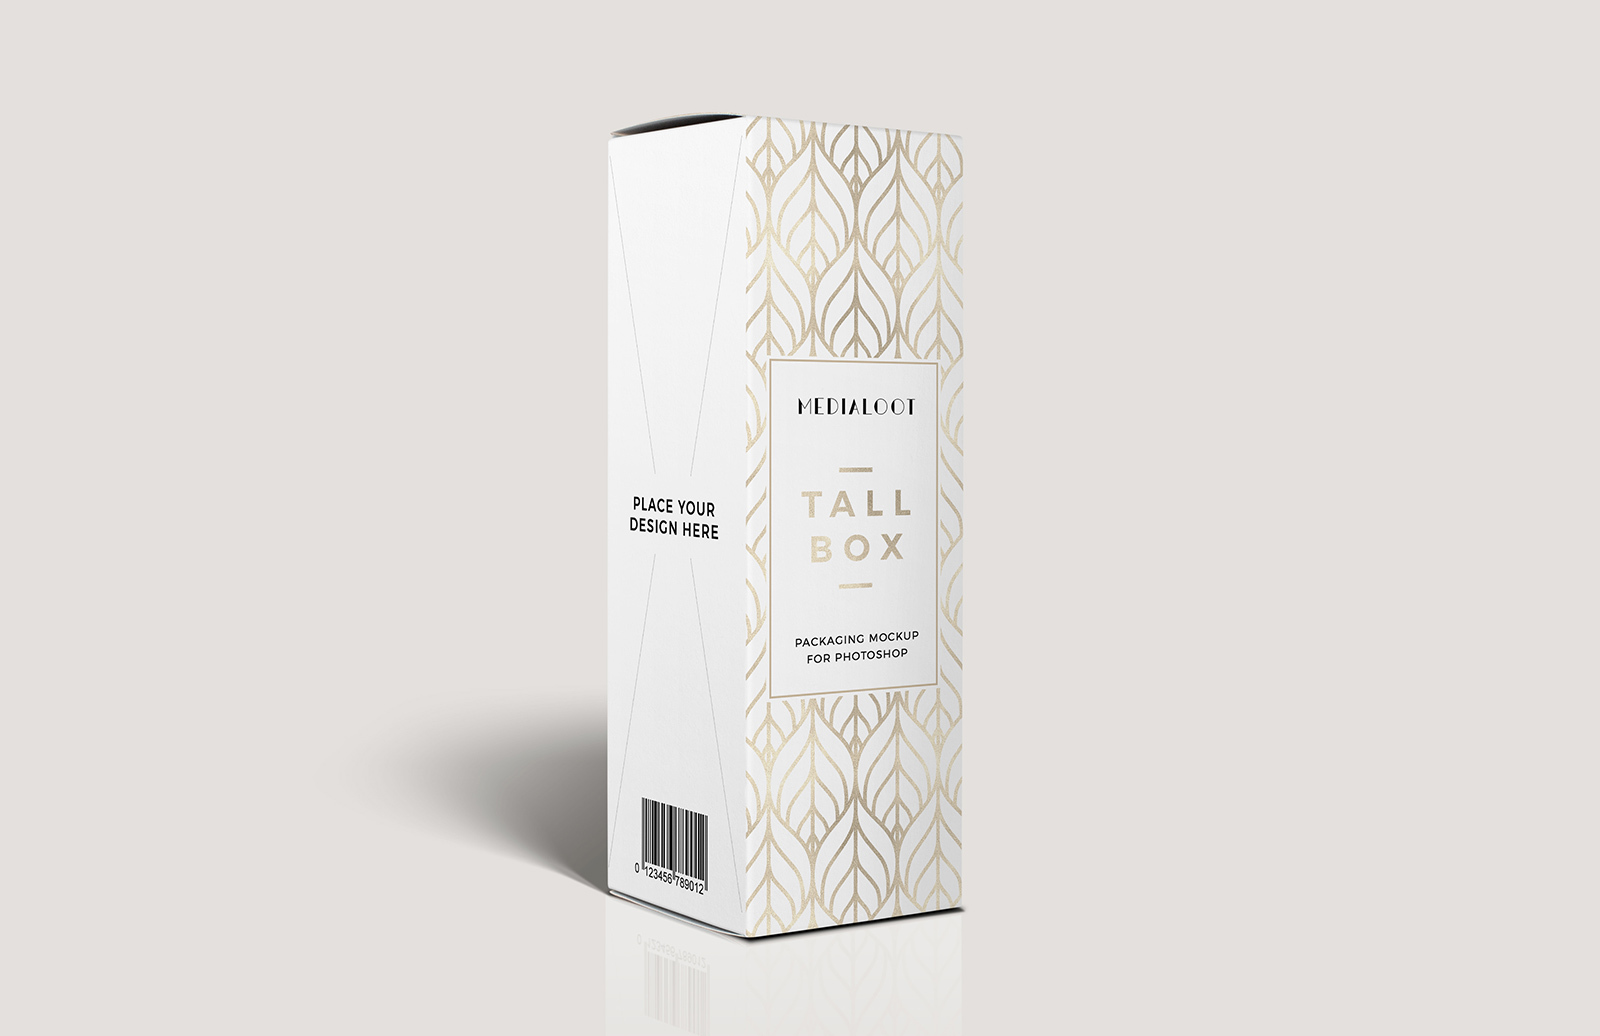 Download Tall Box Packaging Mockup for Photoshop — Medialoot